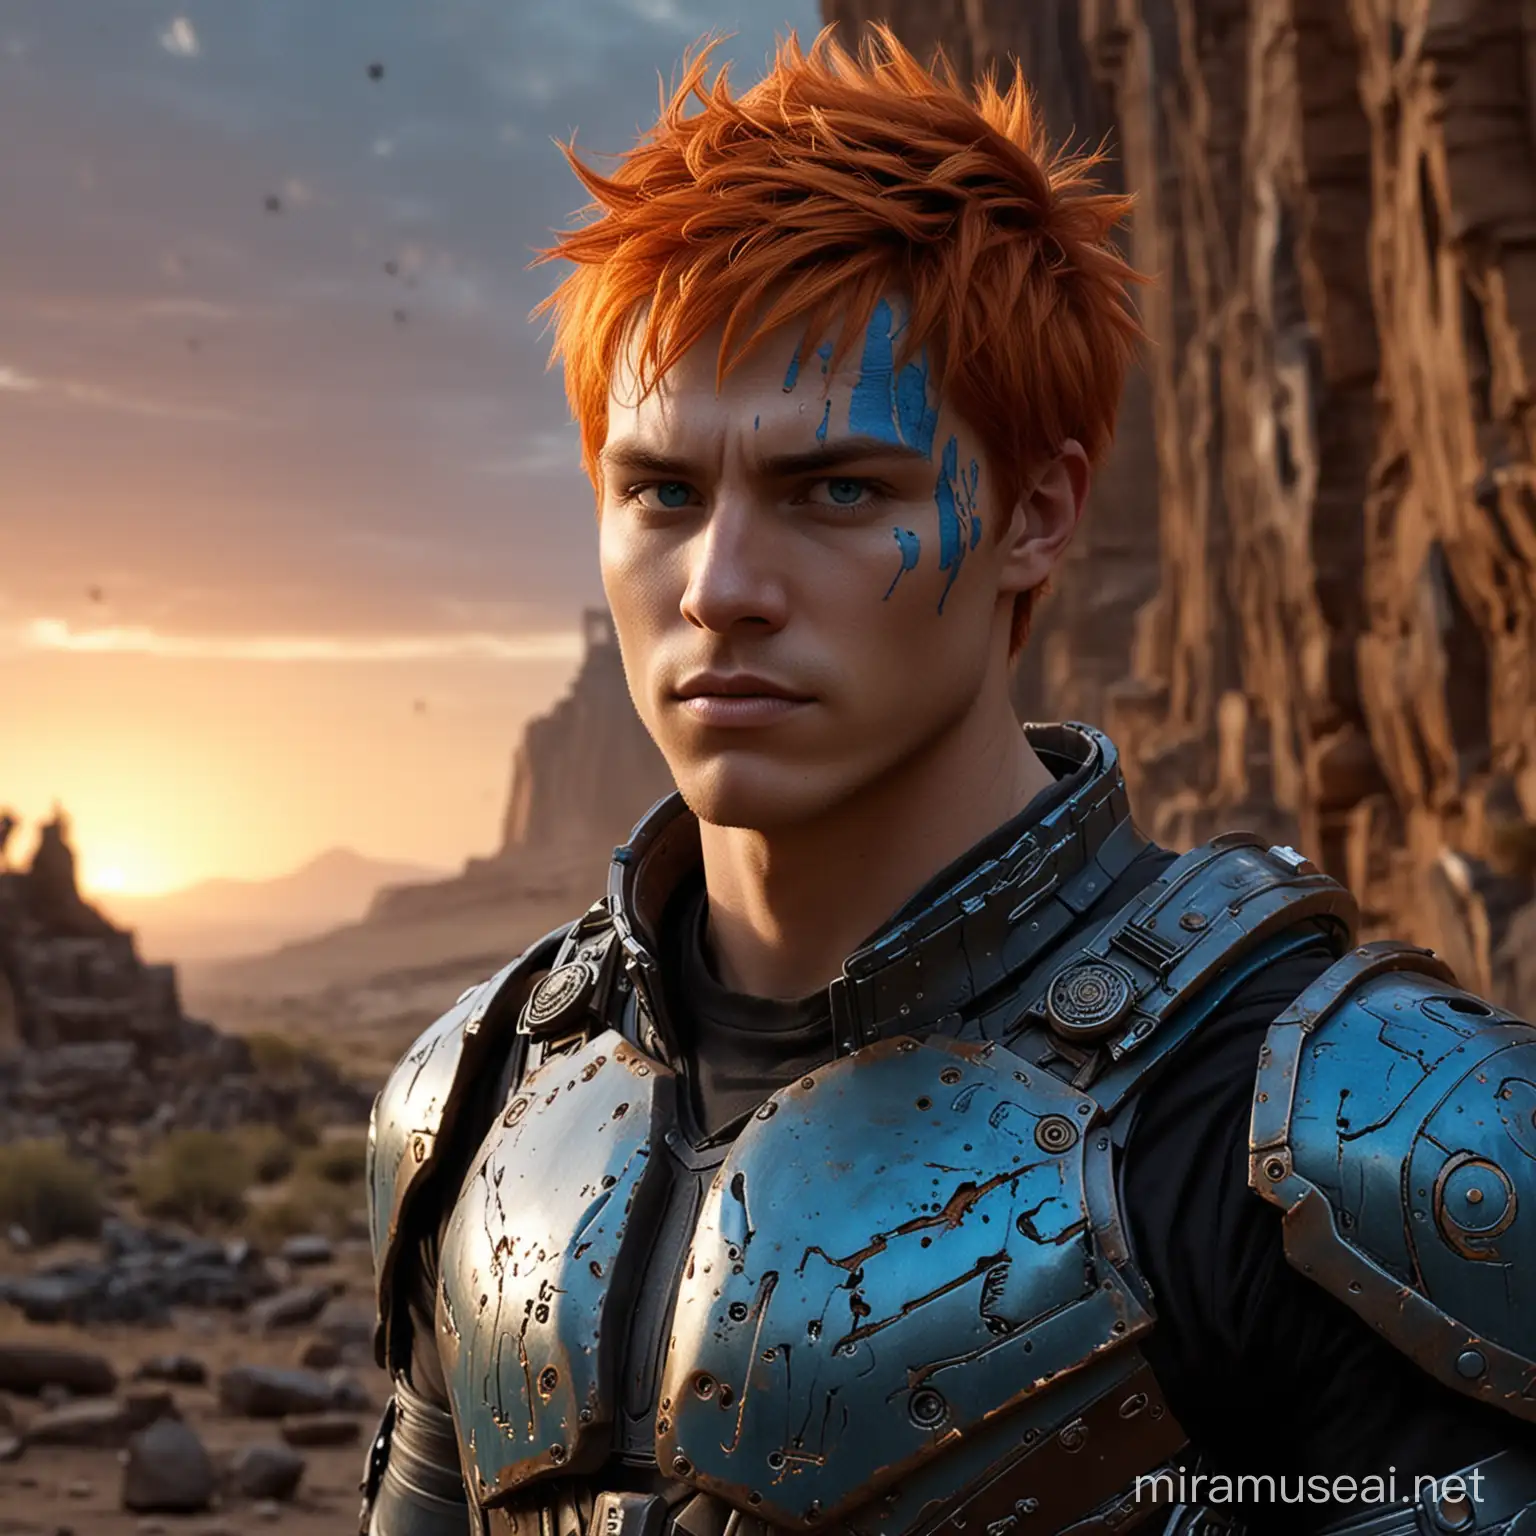 Character: Curtis Takara, a young psionicist with orange hair that flares between sunset and ember hues. His eyes are cool piercing blue, etched with fine lines hinting at a wisdom beyond his years.

Body: Lean and muscular physique, sculpted by years of psionic training. Worn, hi-tech combat armor with a sleek, black exoskeleton and glowing blue accents follows the contours of his muscles.  Precise and controlled movements.  A worn psionic dampener ring adorns his finger.

Clothing:  A dark, moisture-wicking undersuit visible beneath the armor.  Comfortable cargo pants with integrated knee pads complete the outfit.

Expression: A serious expression with a hint of hidden curiosity in his eyes.  A faint aura of power crackles around him.

Items:  An ornately carved pendant hangs around his neck, glowing with a faint inner light.

Background: A desolate alien landscape with a crashed spaceship or ancient ruins in the distance.